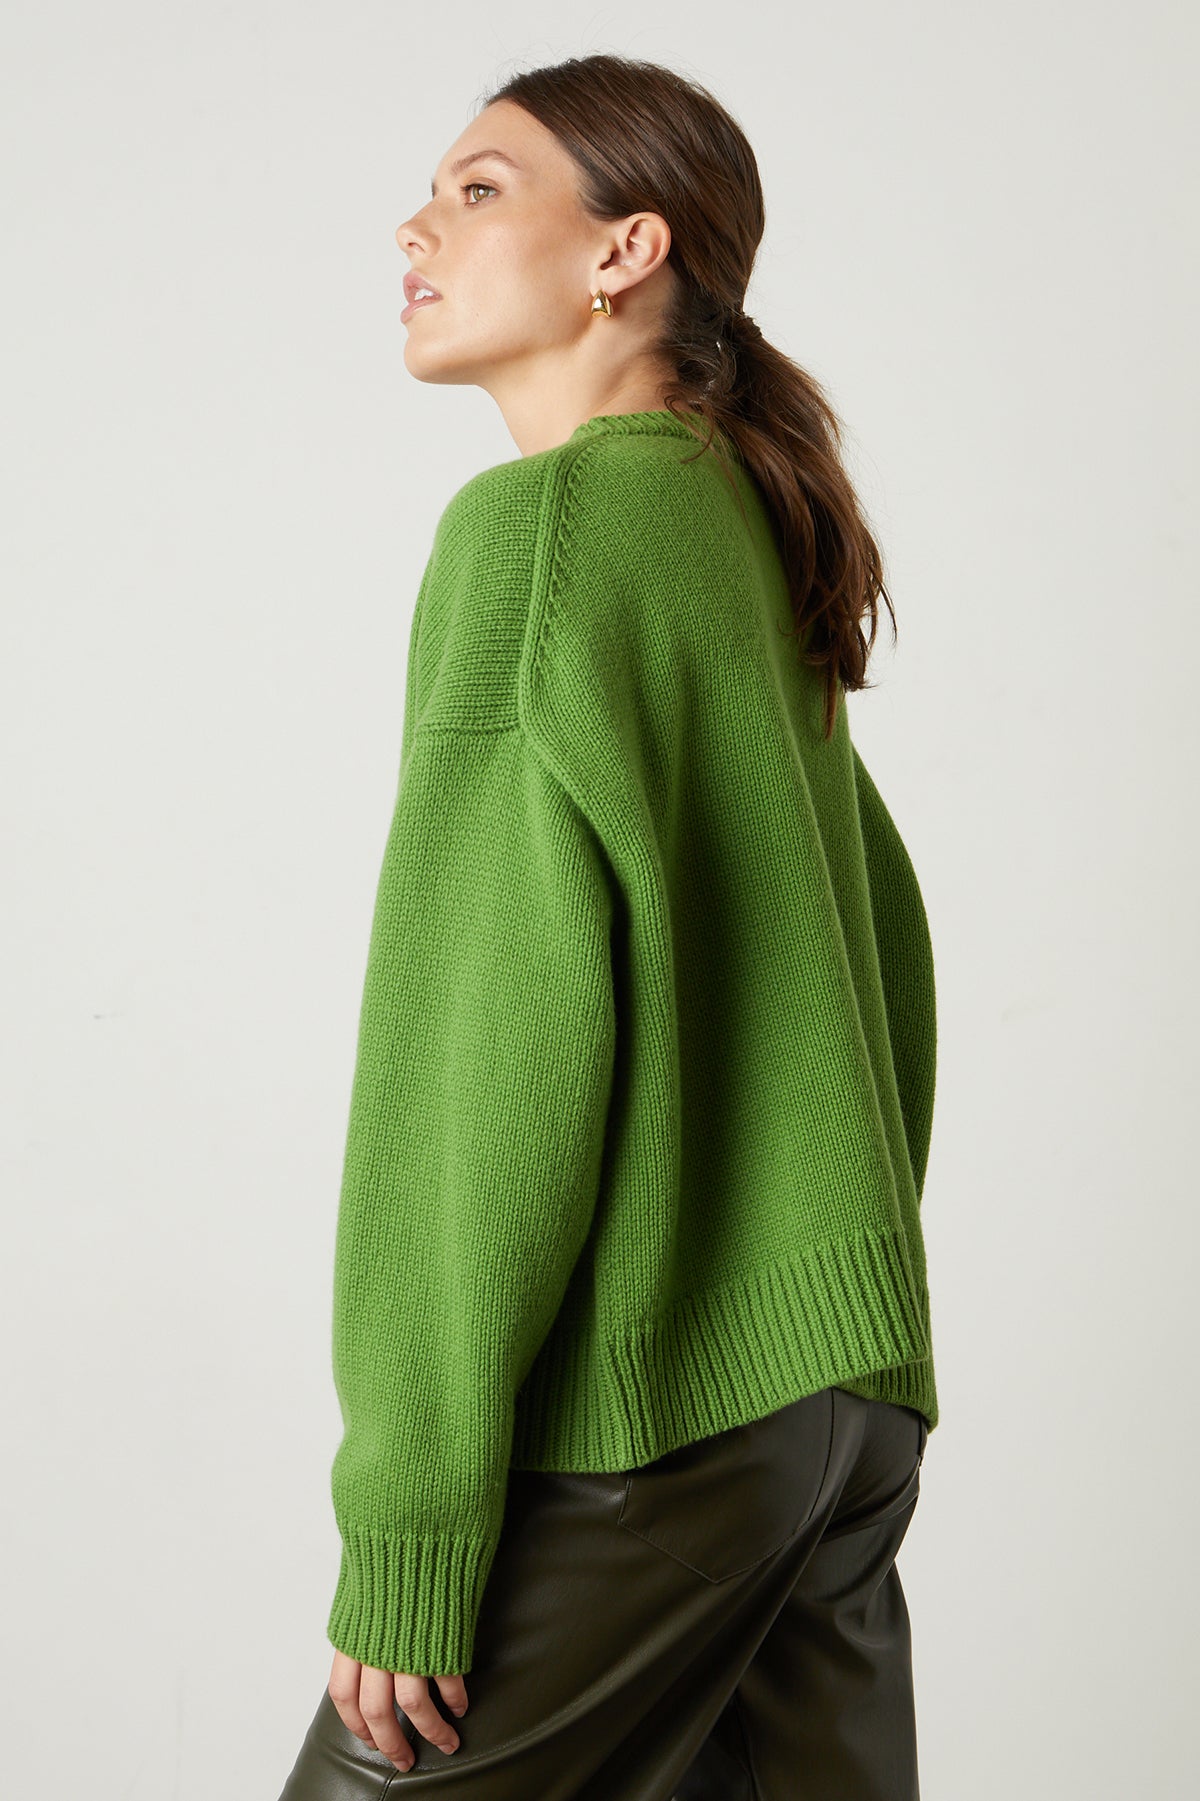   Aurora Button Front Cardigan in vibrant aloe green side with Rihanna Jogger  